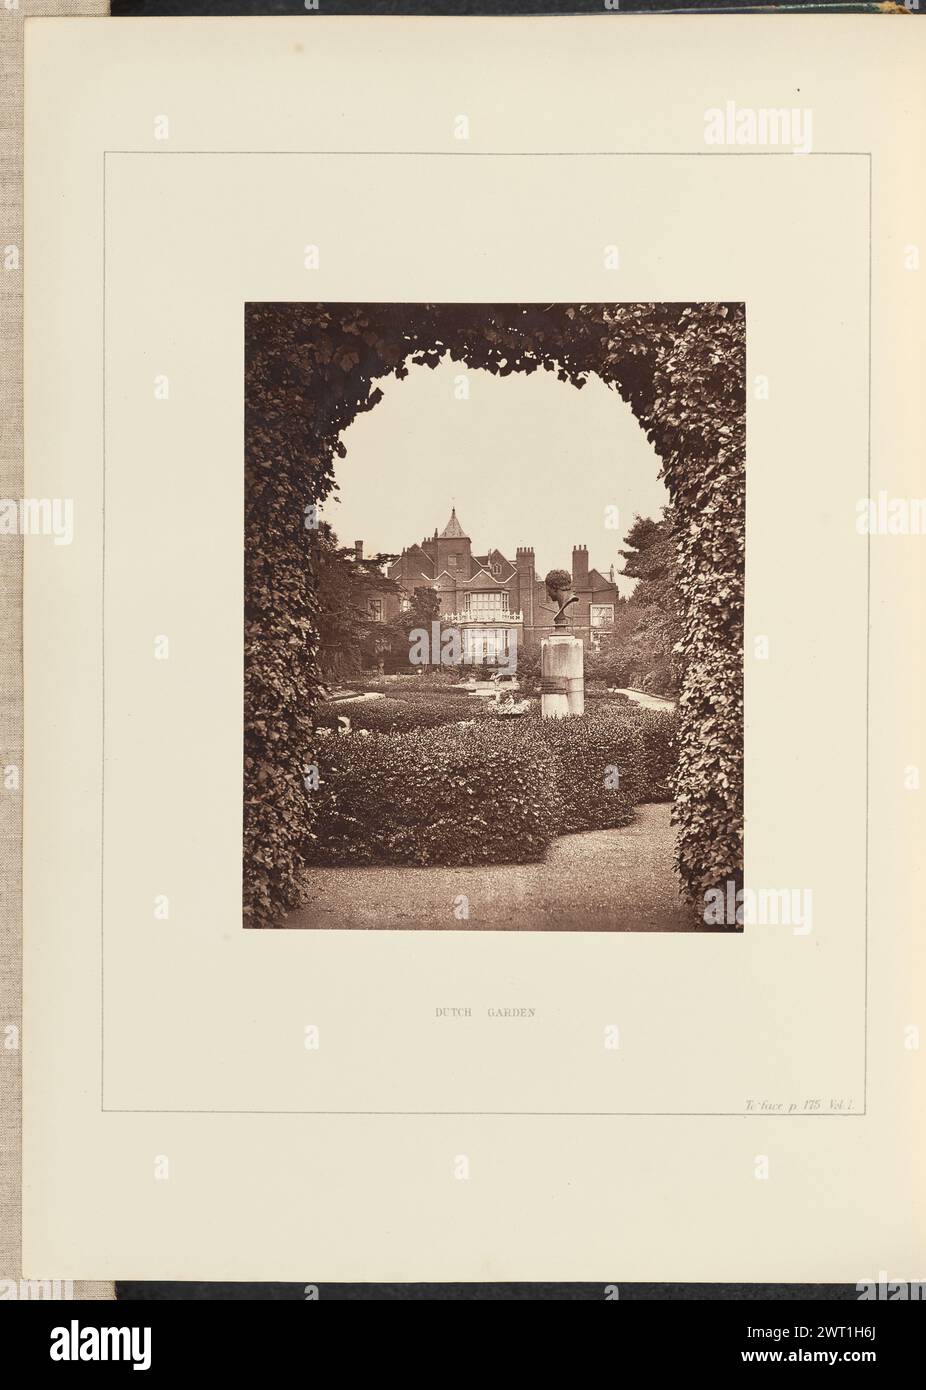 Dutch Garden. Philip H. Delamotte, photographer (British, 1820 - 1889) 1874 View looking into a formal garden from beneath an arched hedge. There is a large bust of a man's head on a pedestal among the manicured hedges. Holland House can be seen in the background. (Recto, mount) lower center, black printed text: 'DUTCH GARDEN.'; lower right, black printed text: 'To face p. 175. Vol. I.'; (Verso, mount) lower left, pencil: 'IB 60.7 (Del)'; Stock Photo